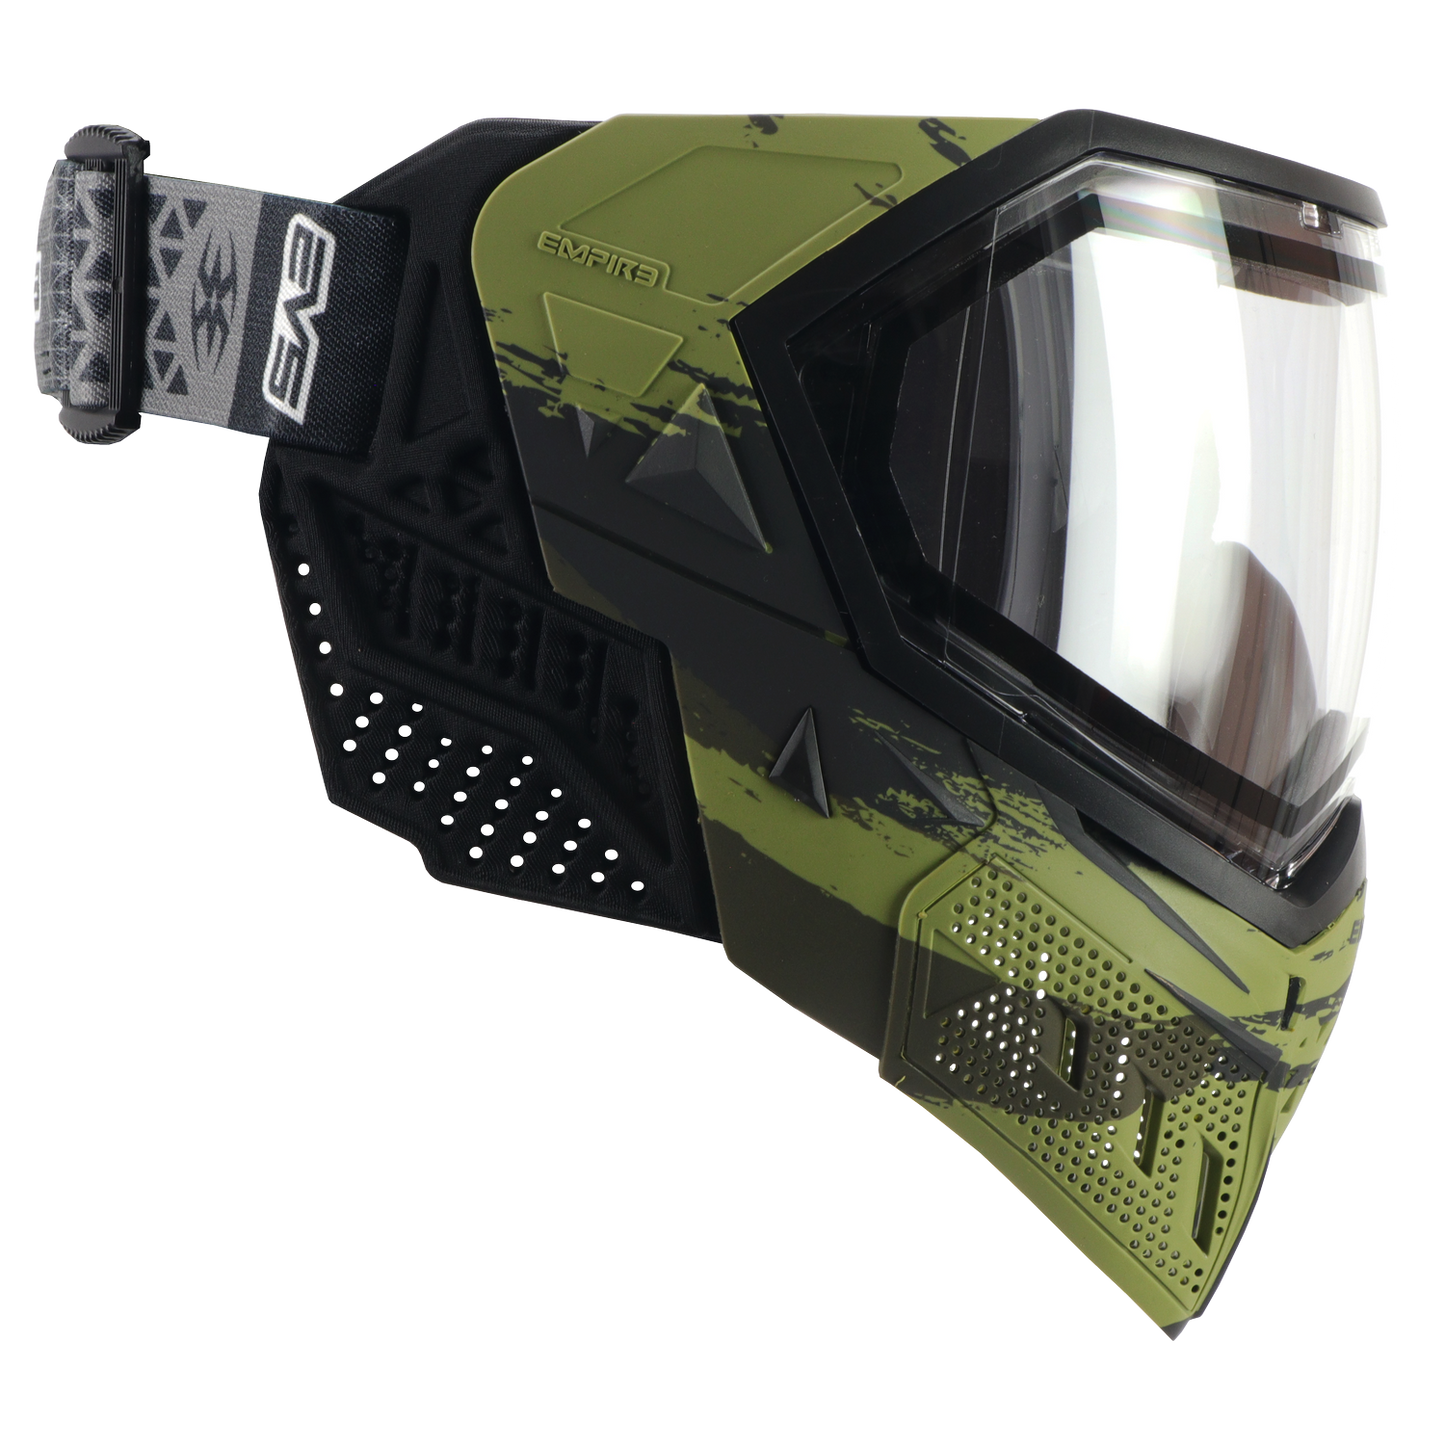 Empire EVS Goggle - Warpaint LE - with 2 lenses [Thermal Ninja & Thermal Clear]